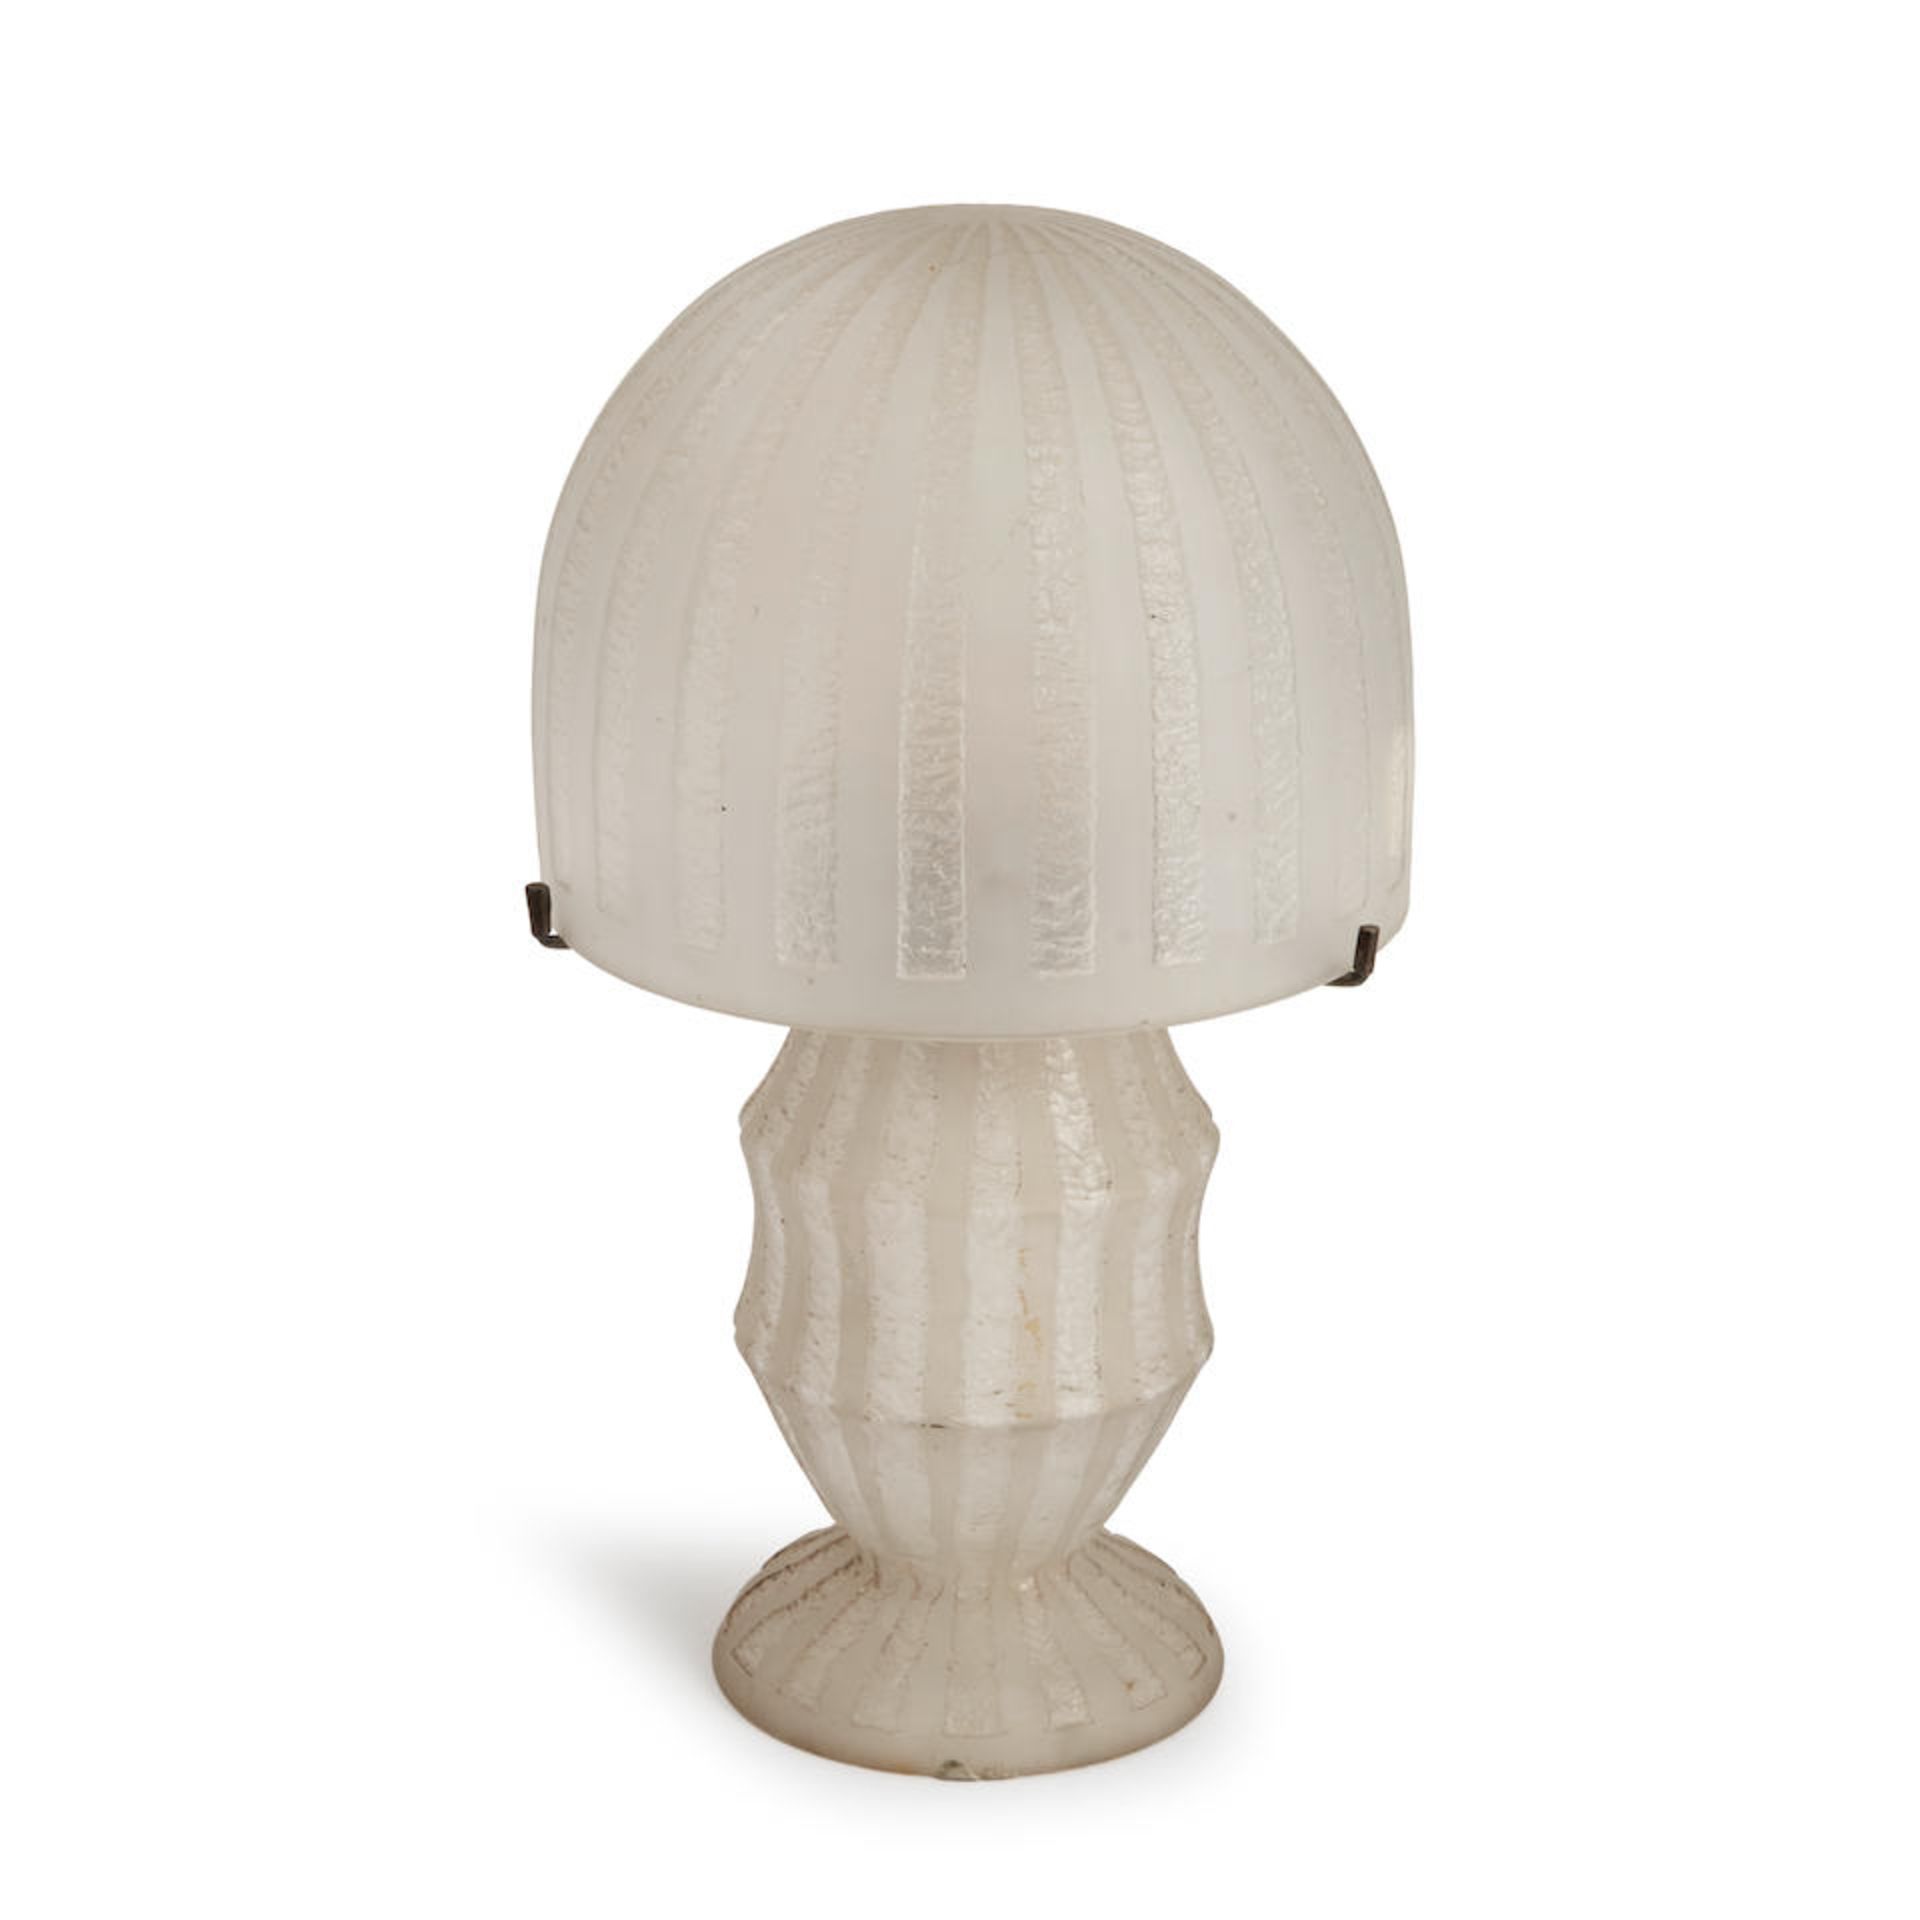 ART DECO ACID-ETCHED TABLE LAMP ATTRIBUTED TO DAUM, France, c. 1930, glass, steel fittings, unma...